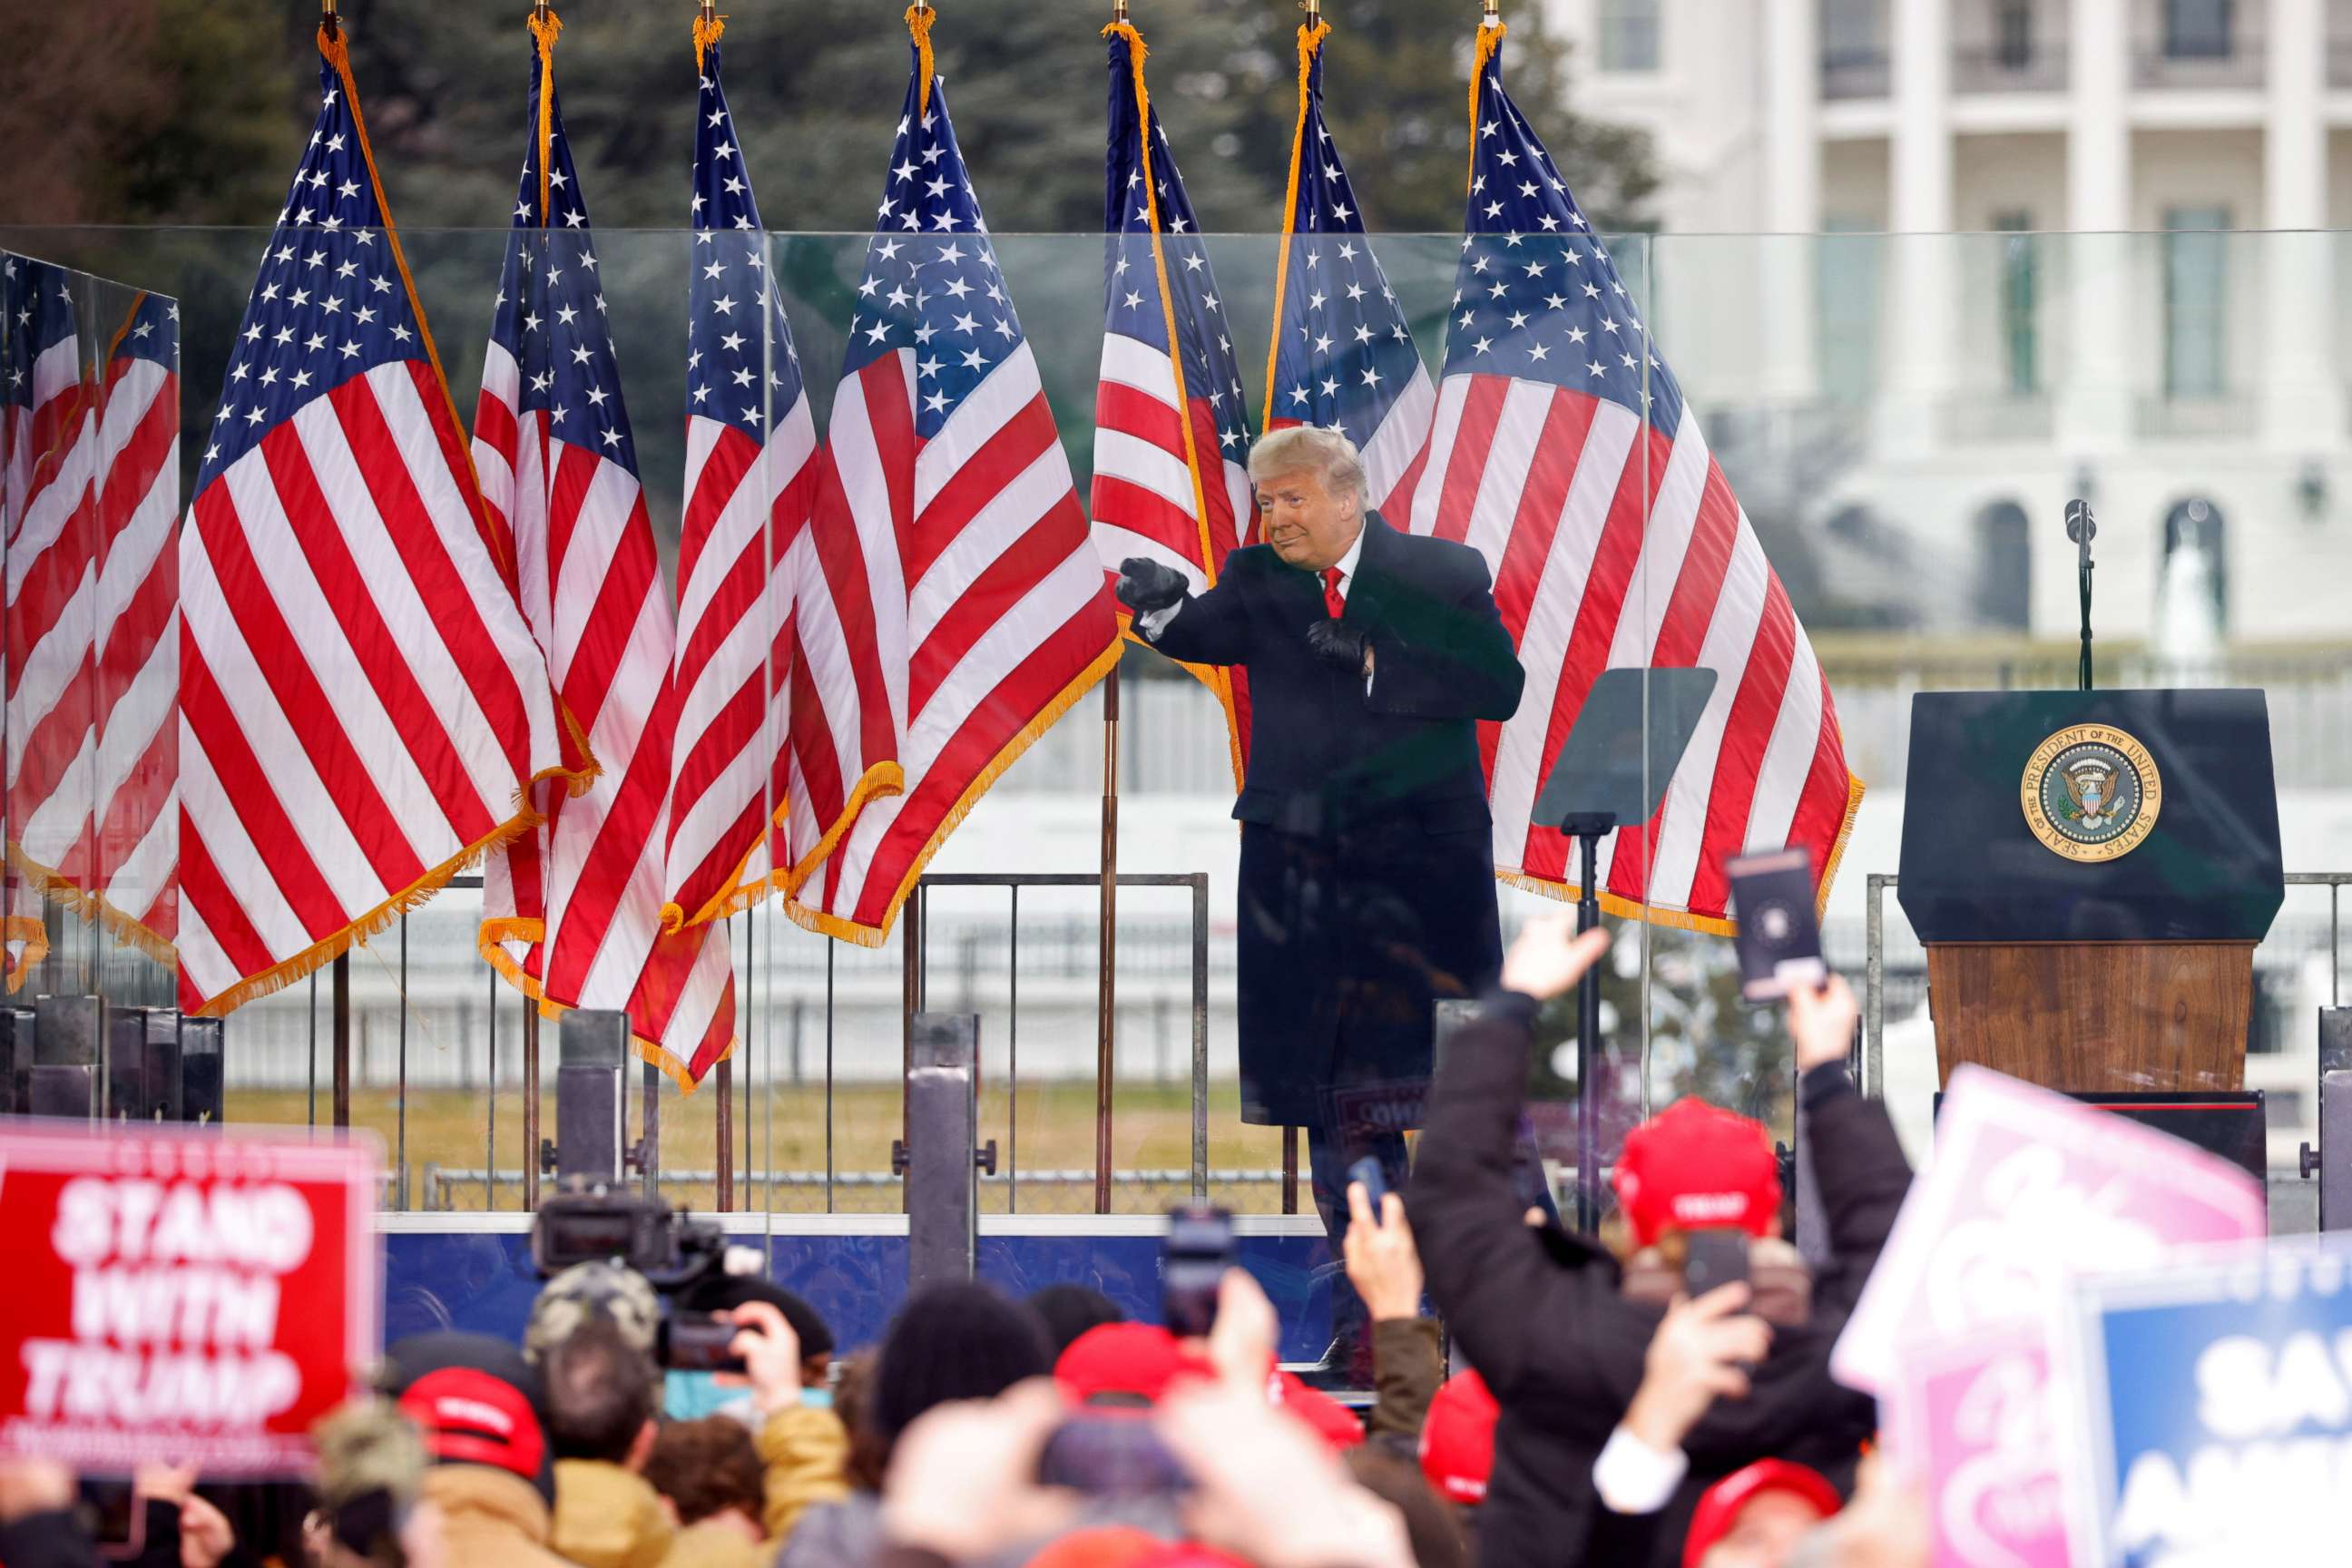 FILE PHOTO: U.S. President Donald Trump gestures at the end of his speech during a rally to contest the certification of the 2020 U.S. presidential election results by the U.S. Congress, in Washington, U.S, January 6, 2021. 